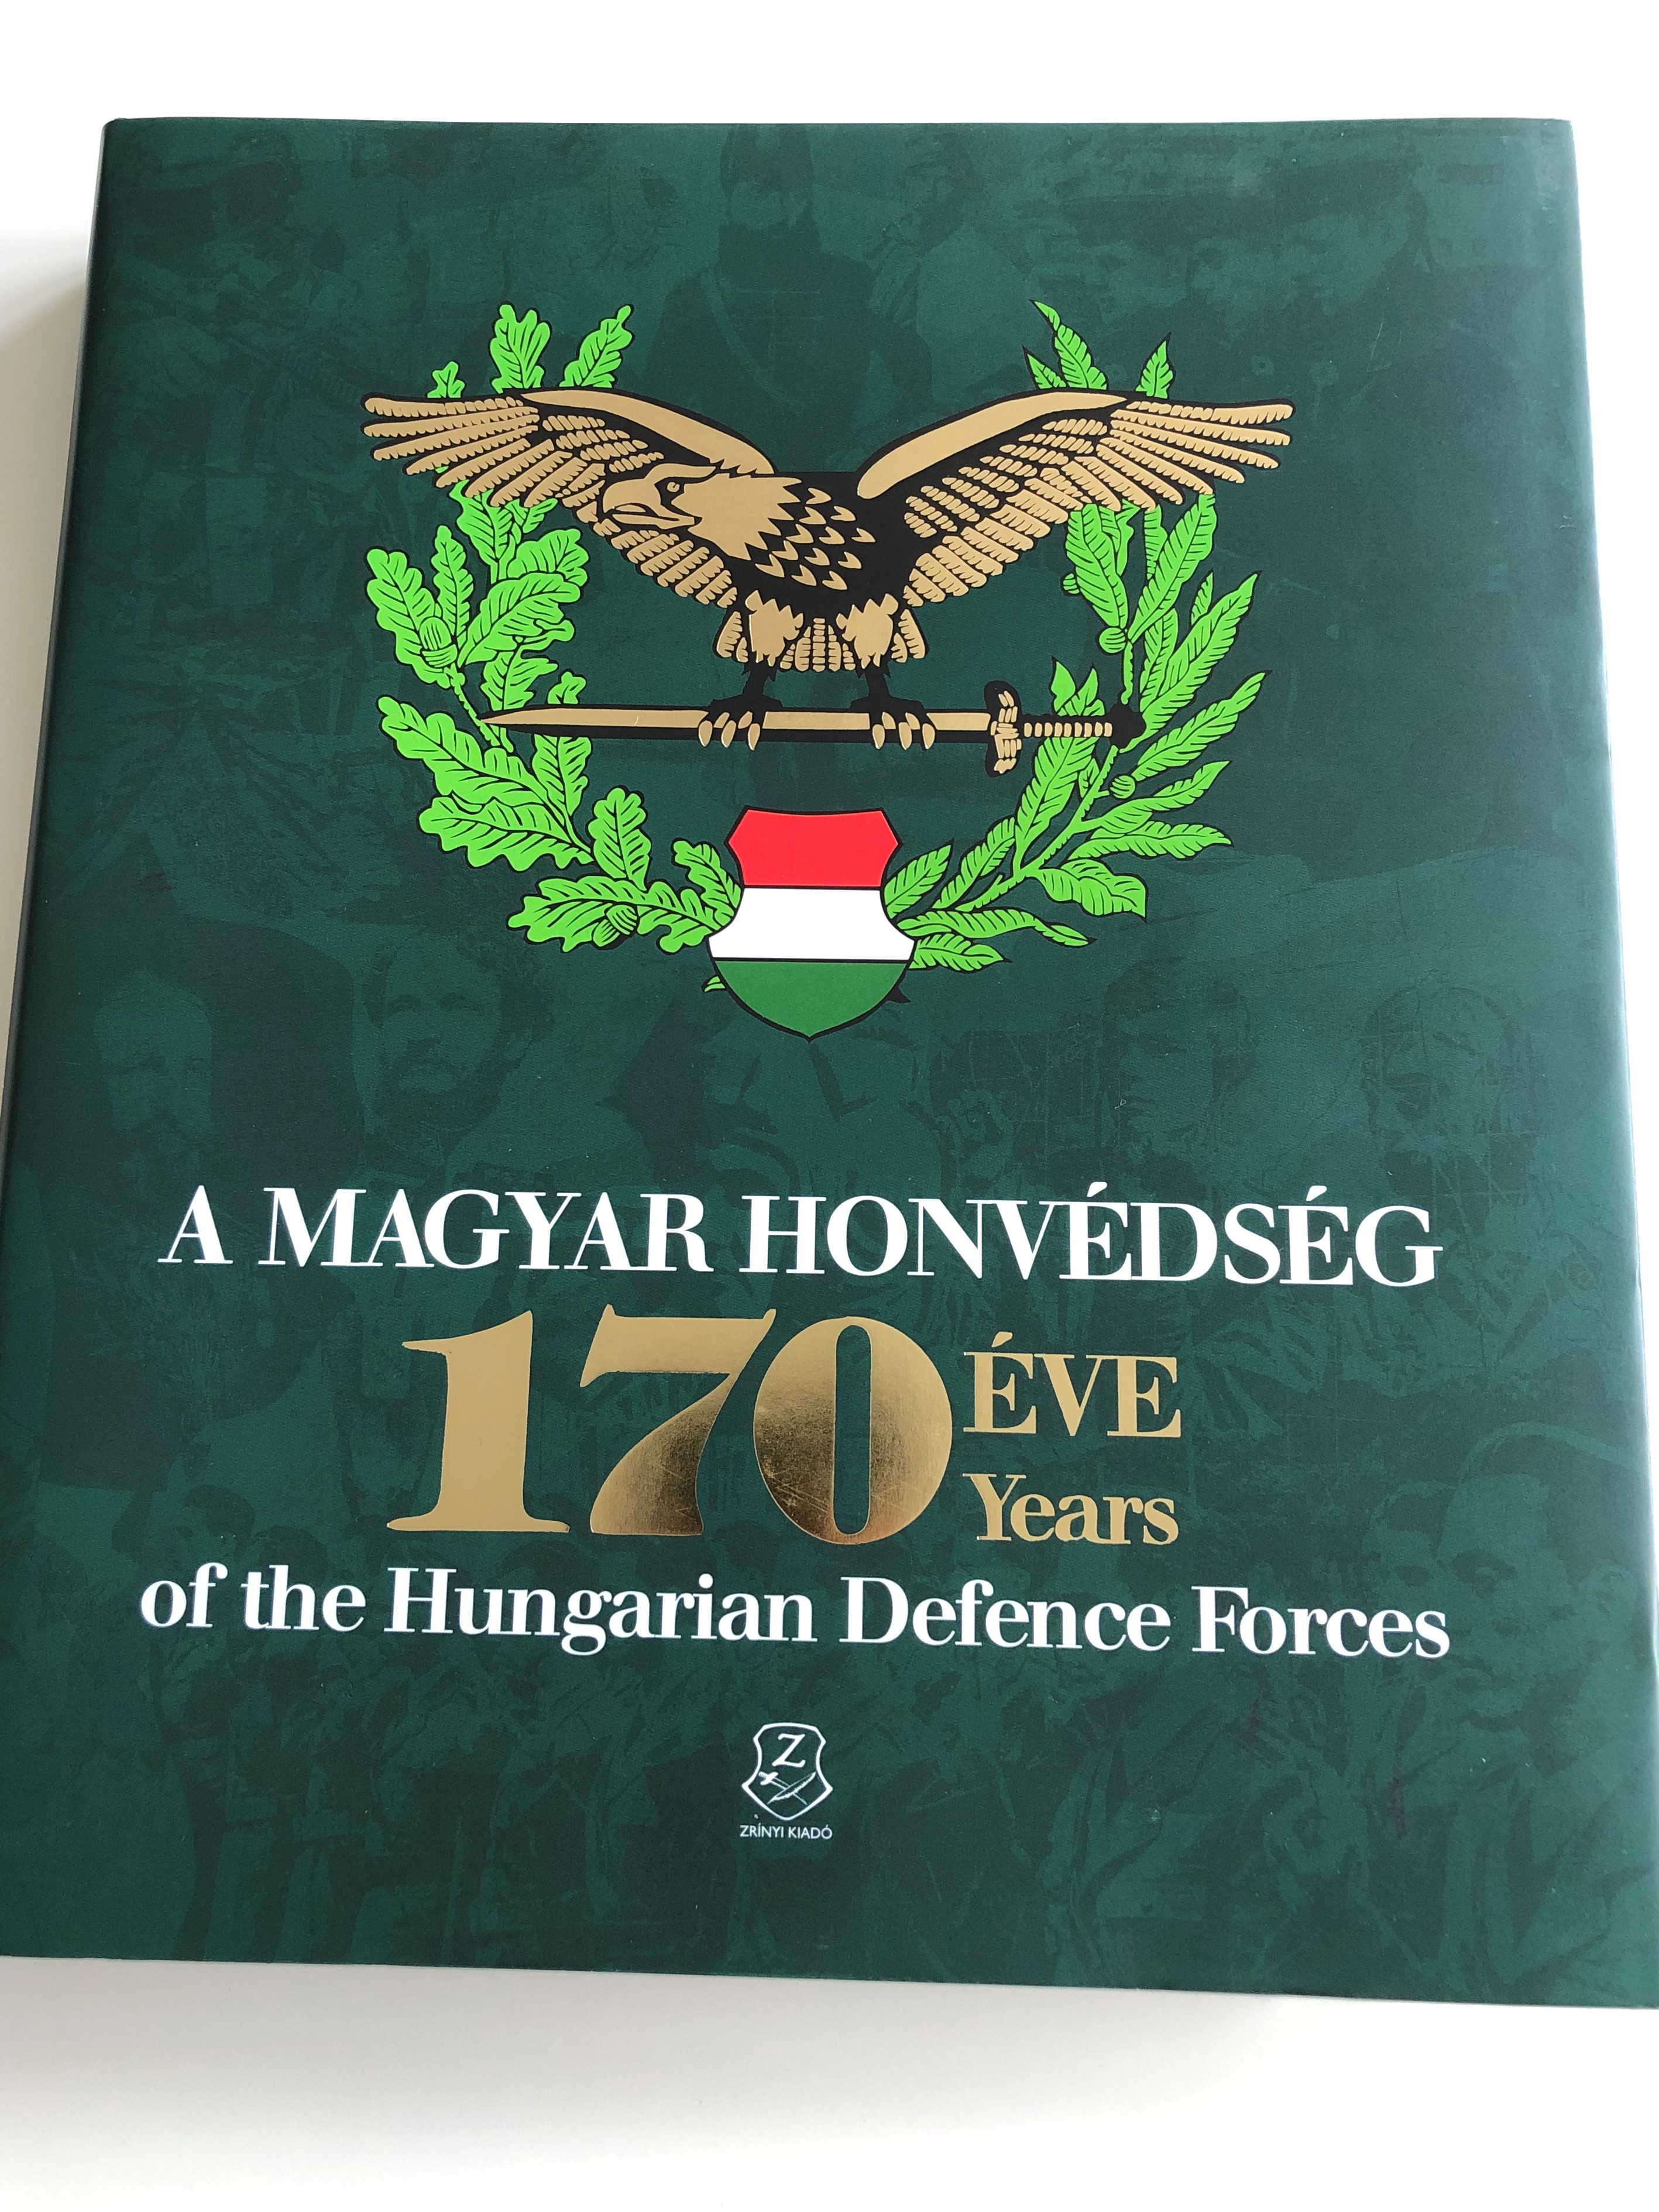 a-magyar-honv-ds-g-170-ve-170-years-of-the-hungarian-defence-forces-military-history-of-hungarian-armed-forces-hungarian-english-bilingual-book-paperback-2018-hm-zr-nyi-1-.jpg